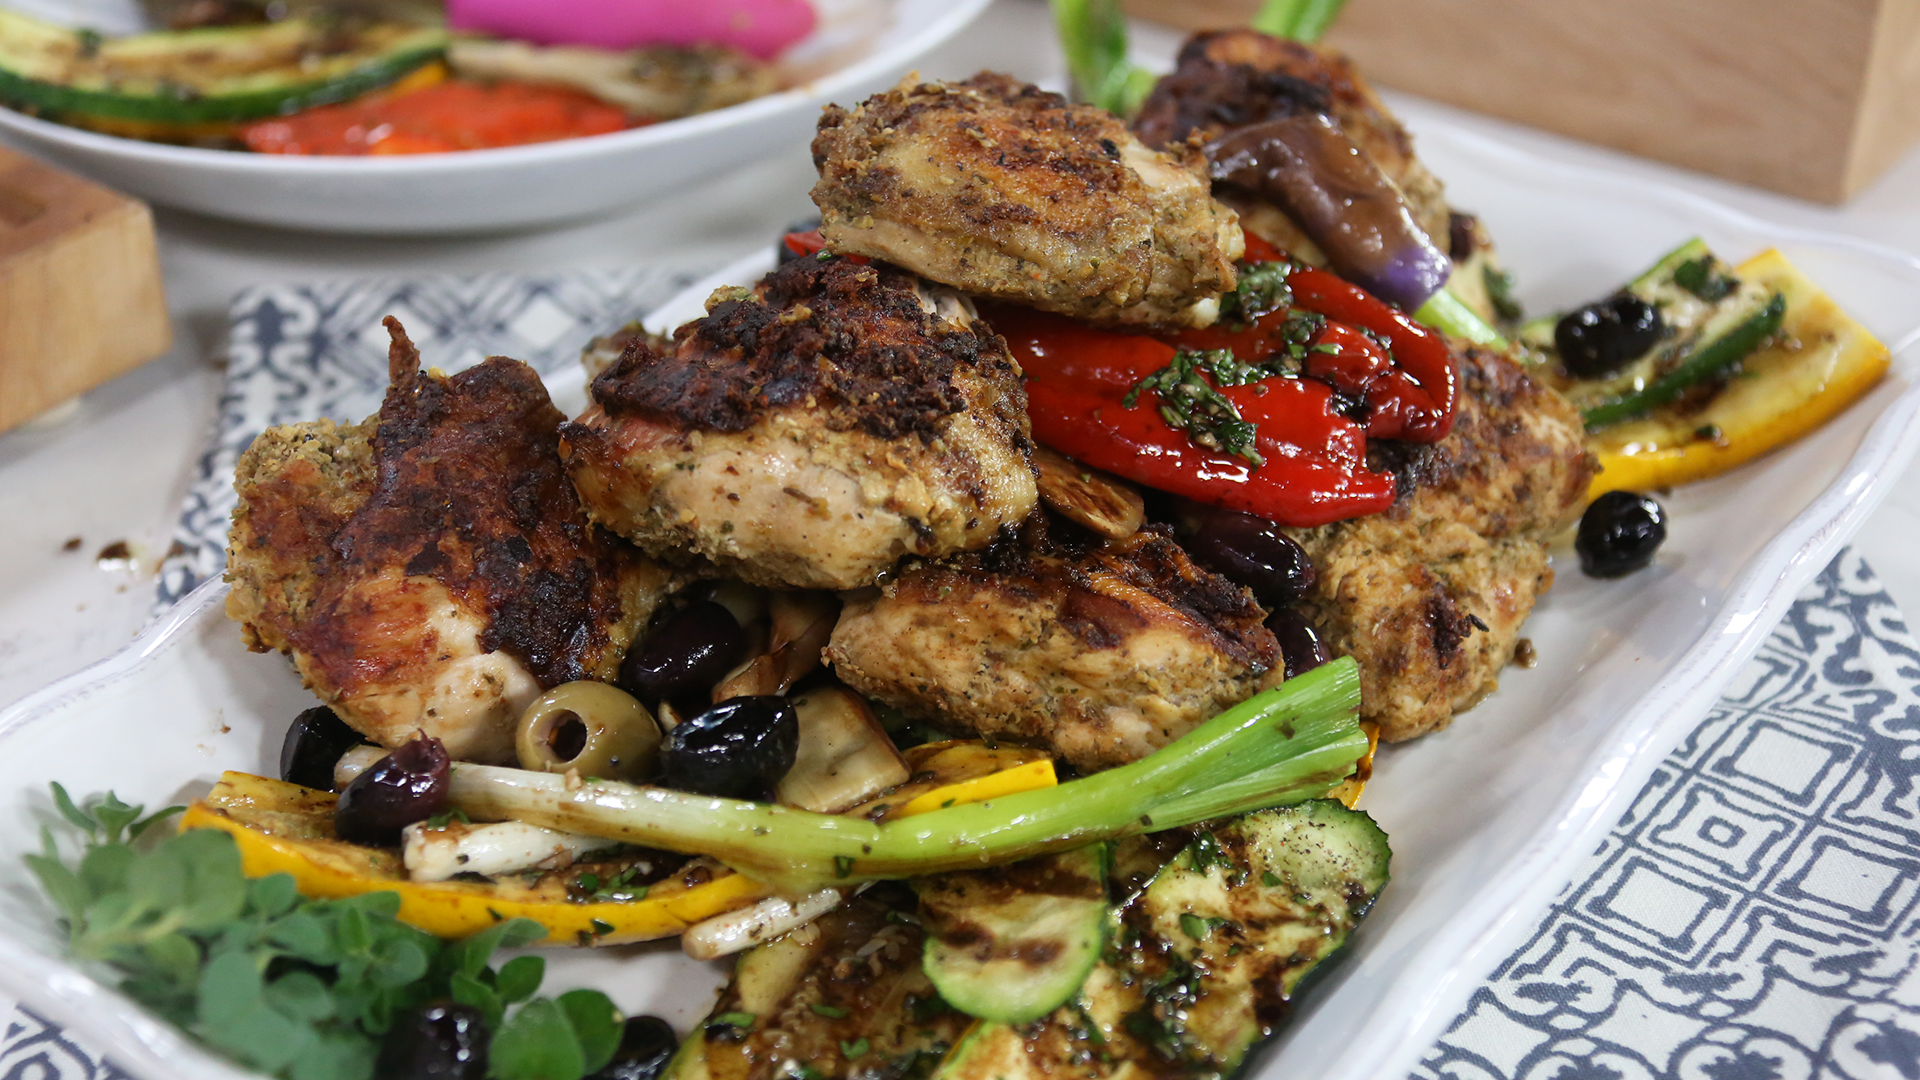 Grilled olive oil and fennel chicken with grilled veggies